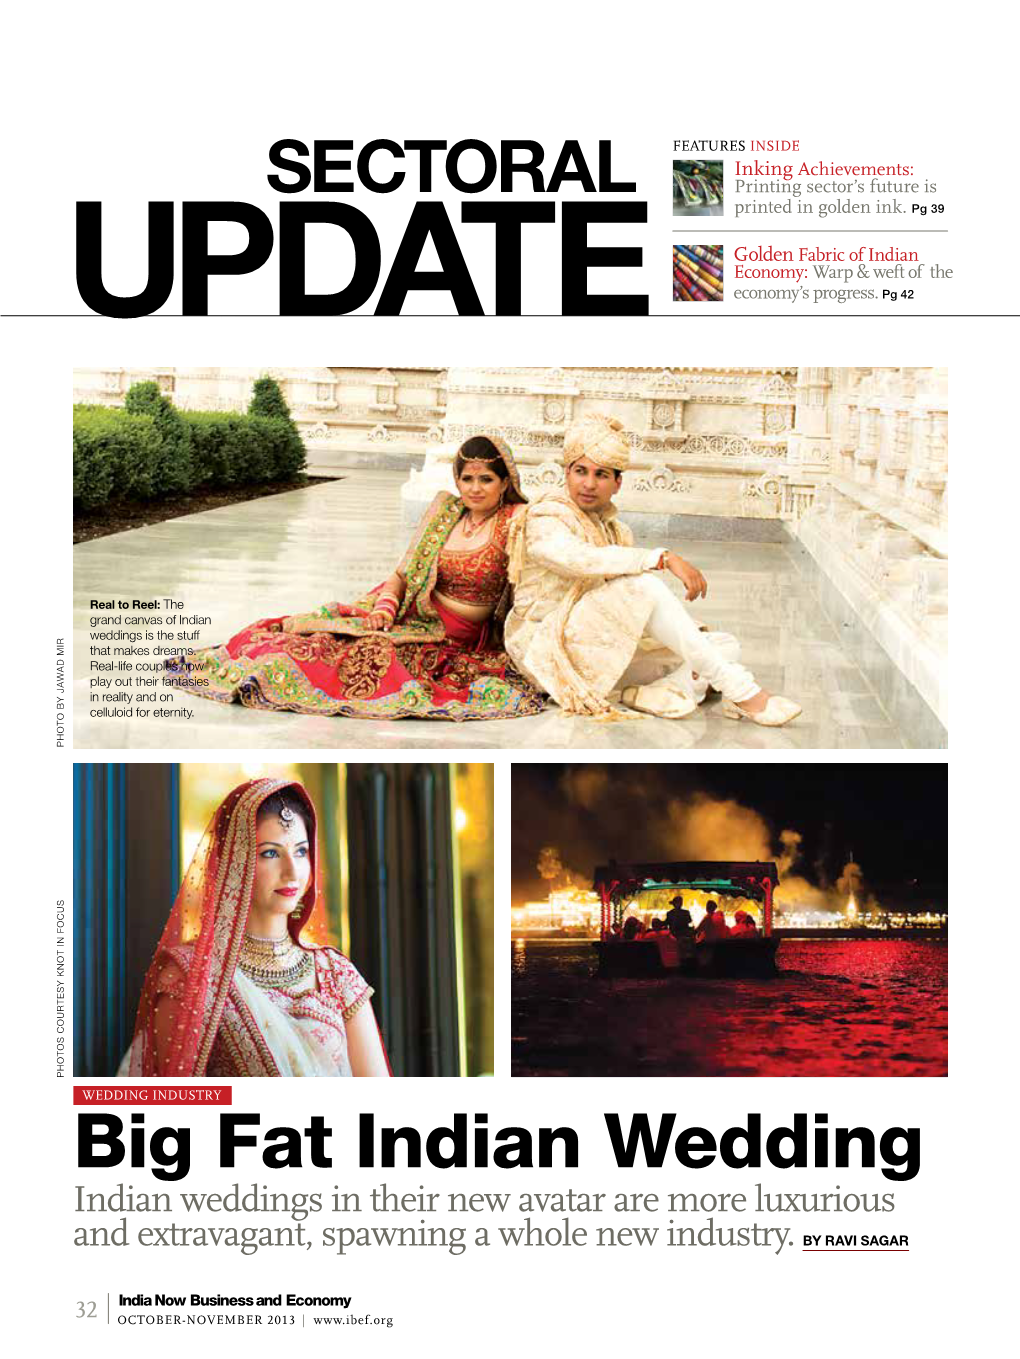 Big Fat Indian Wedding Indian Weddings in Their New Avatar Are More Luxurious and Extravagant, Spawning a Whole New Industry